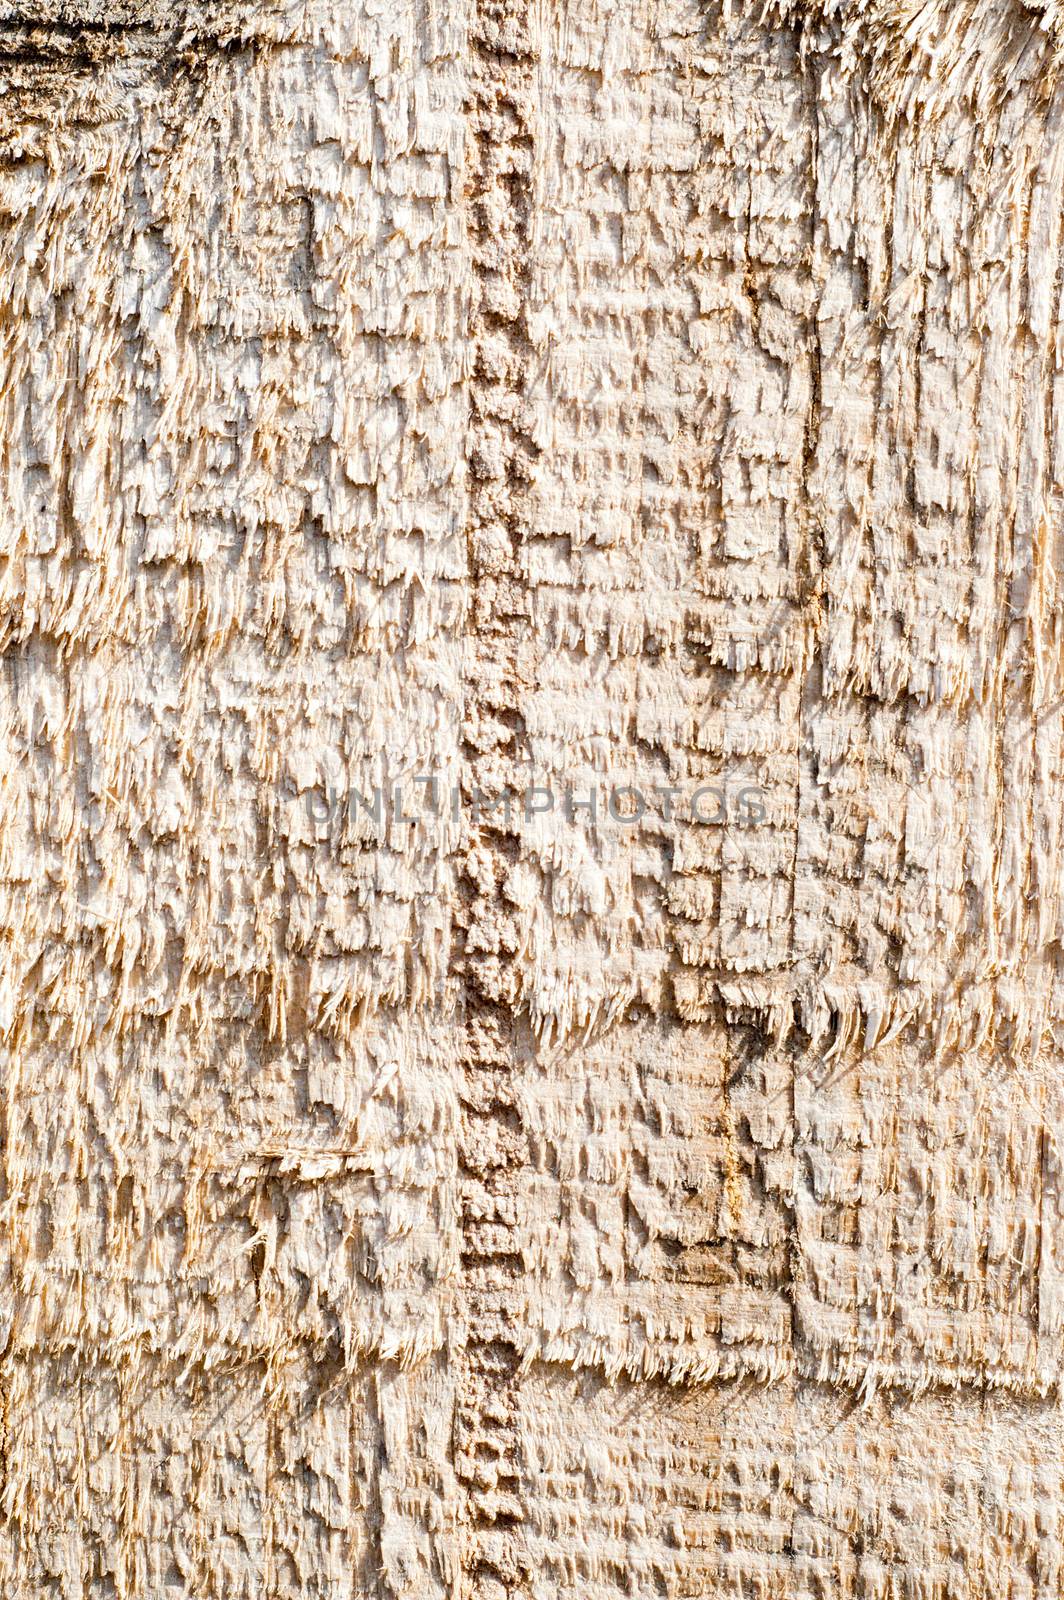 textured surface of board with a rough surface